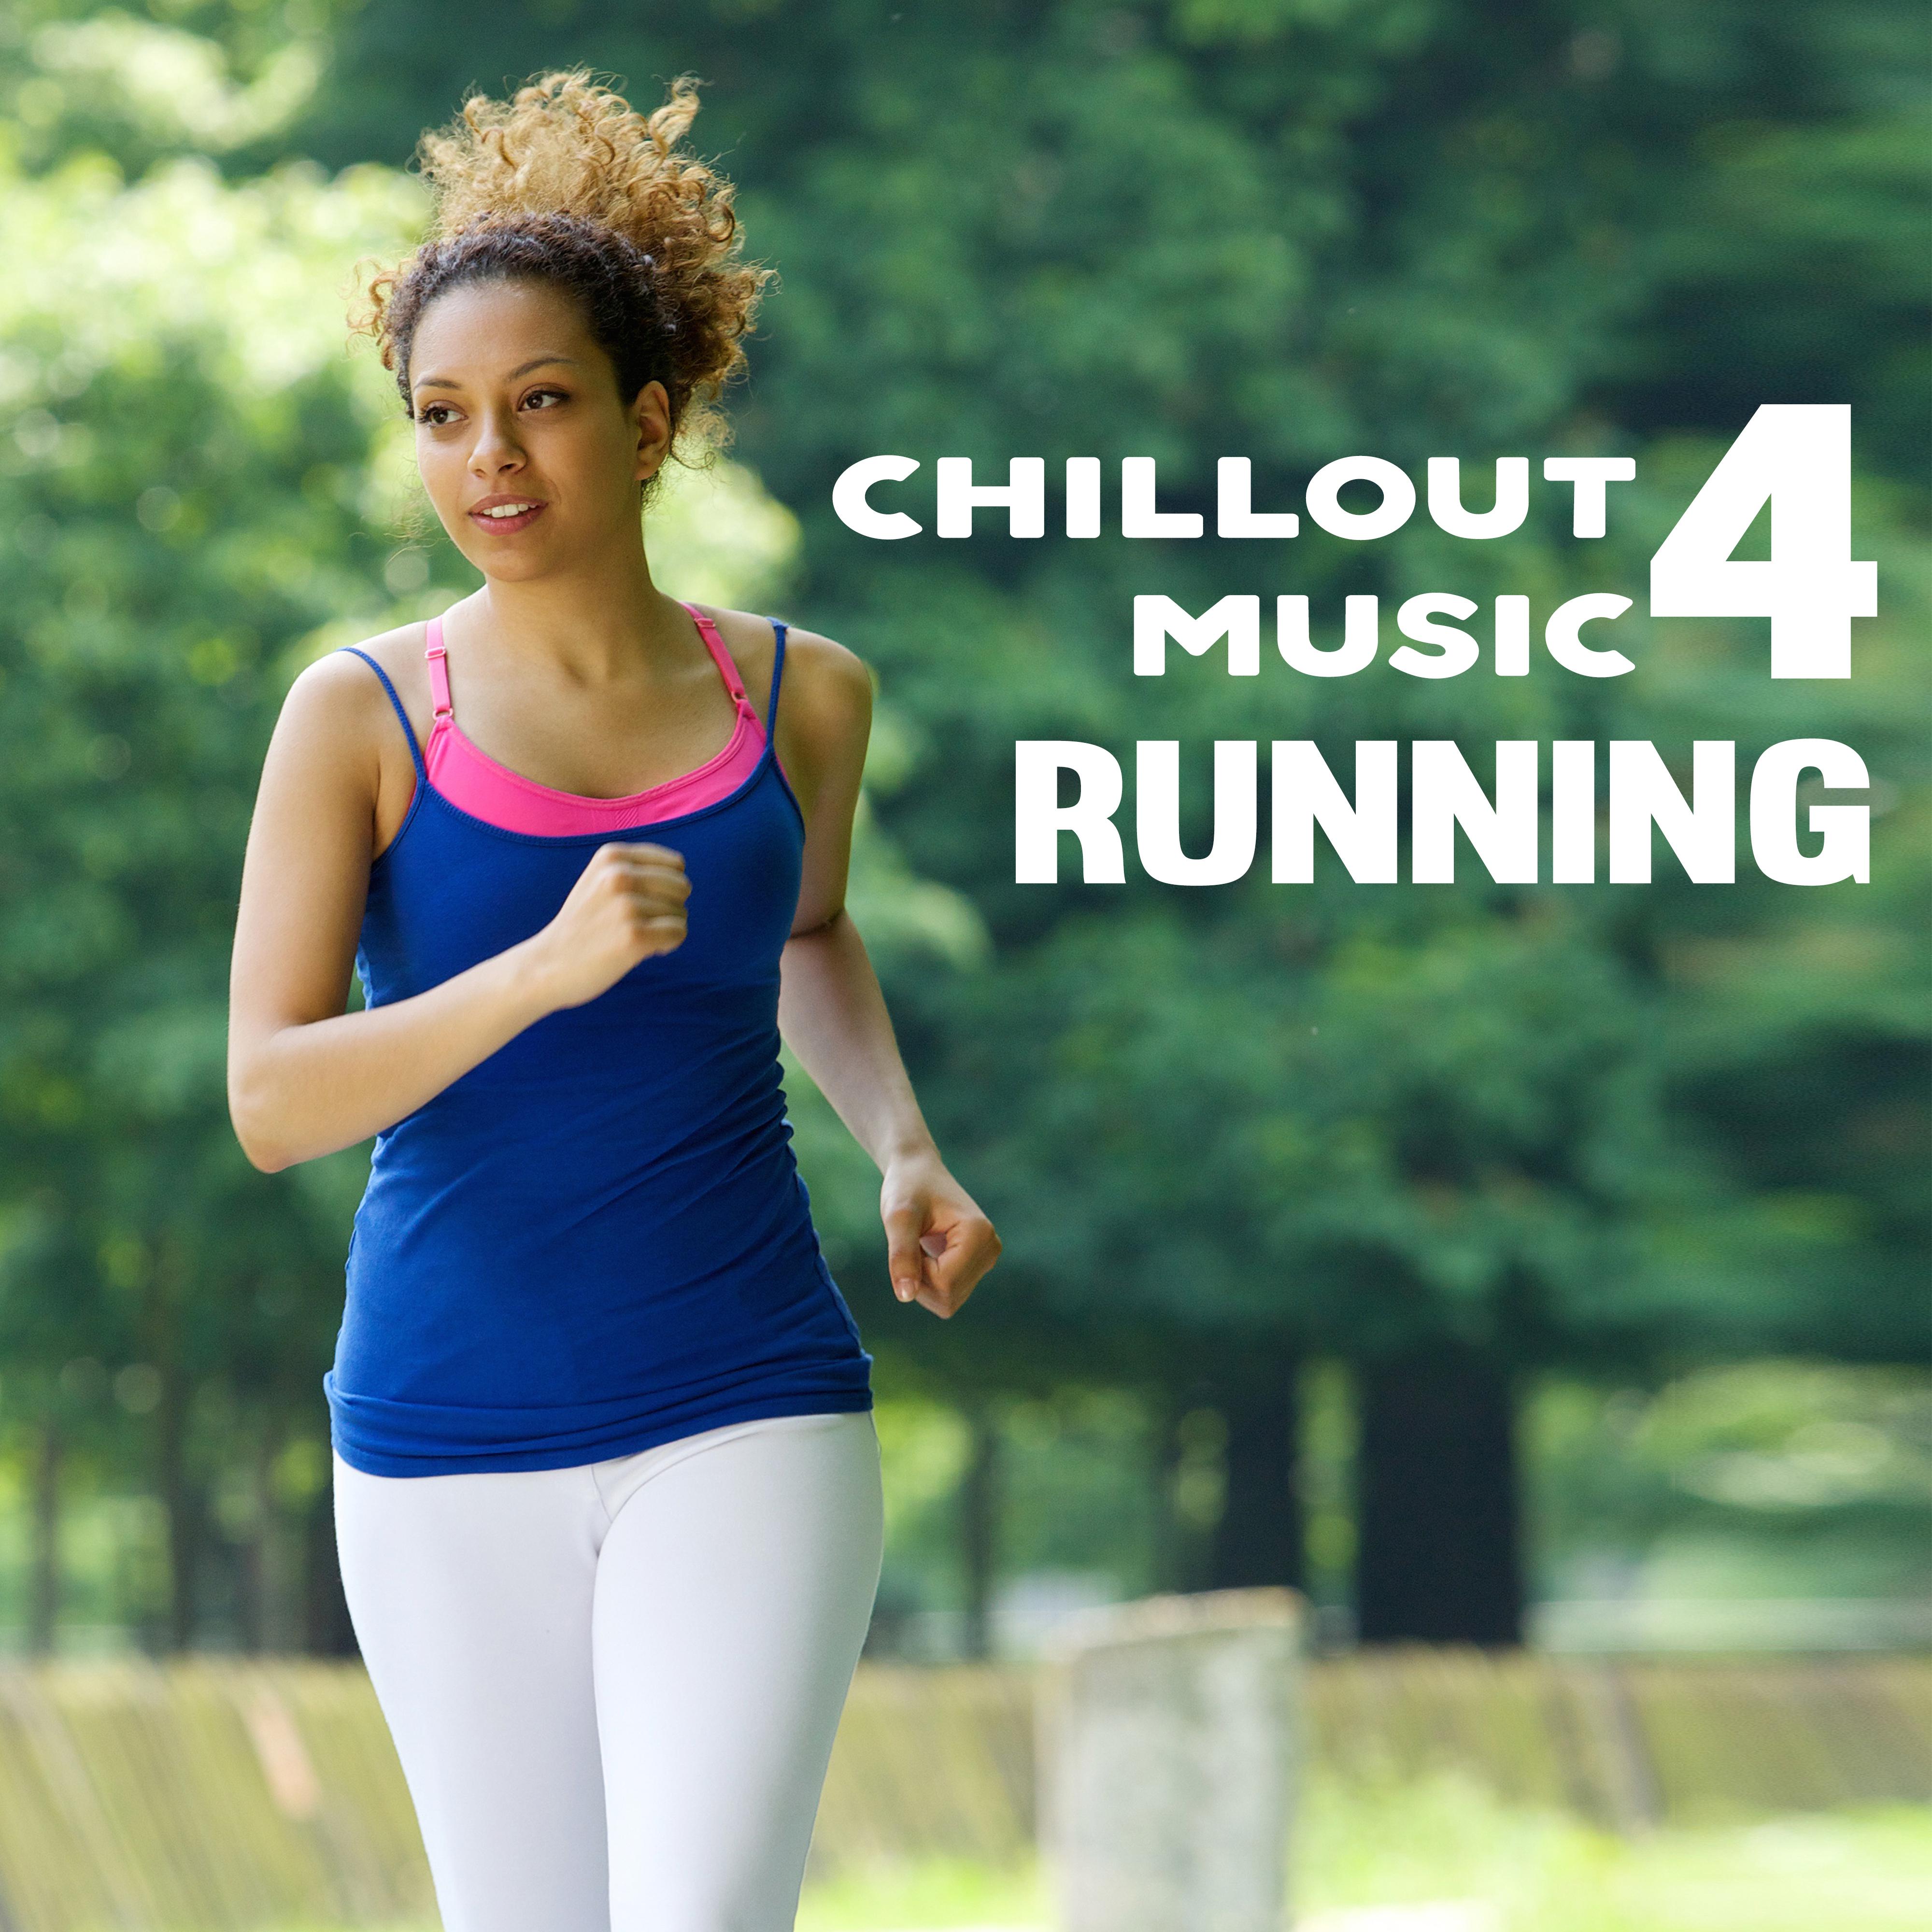 Chillout Music 4 Running